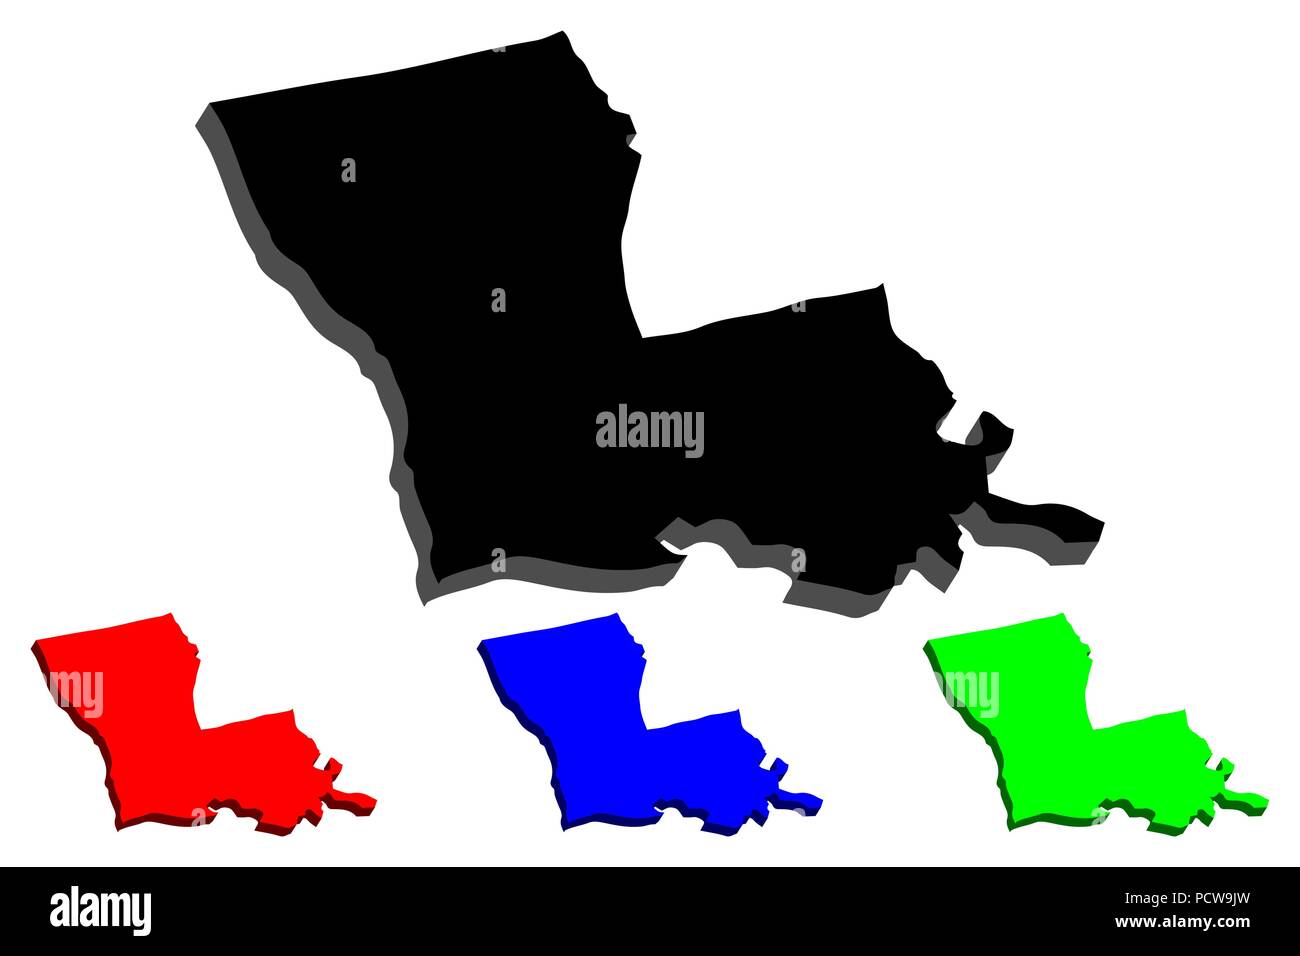 3D map of Louisiana (United States of America) - black, red, blue and green - vector illustration Stock Vector